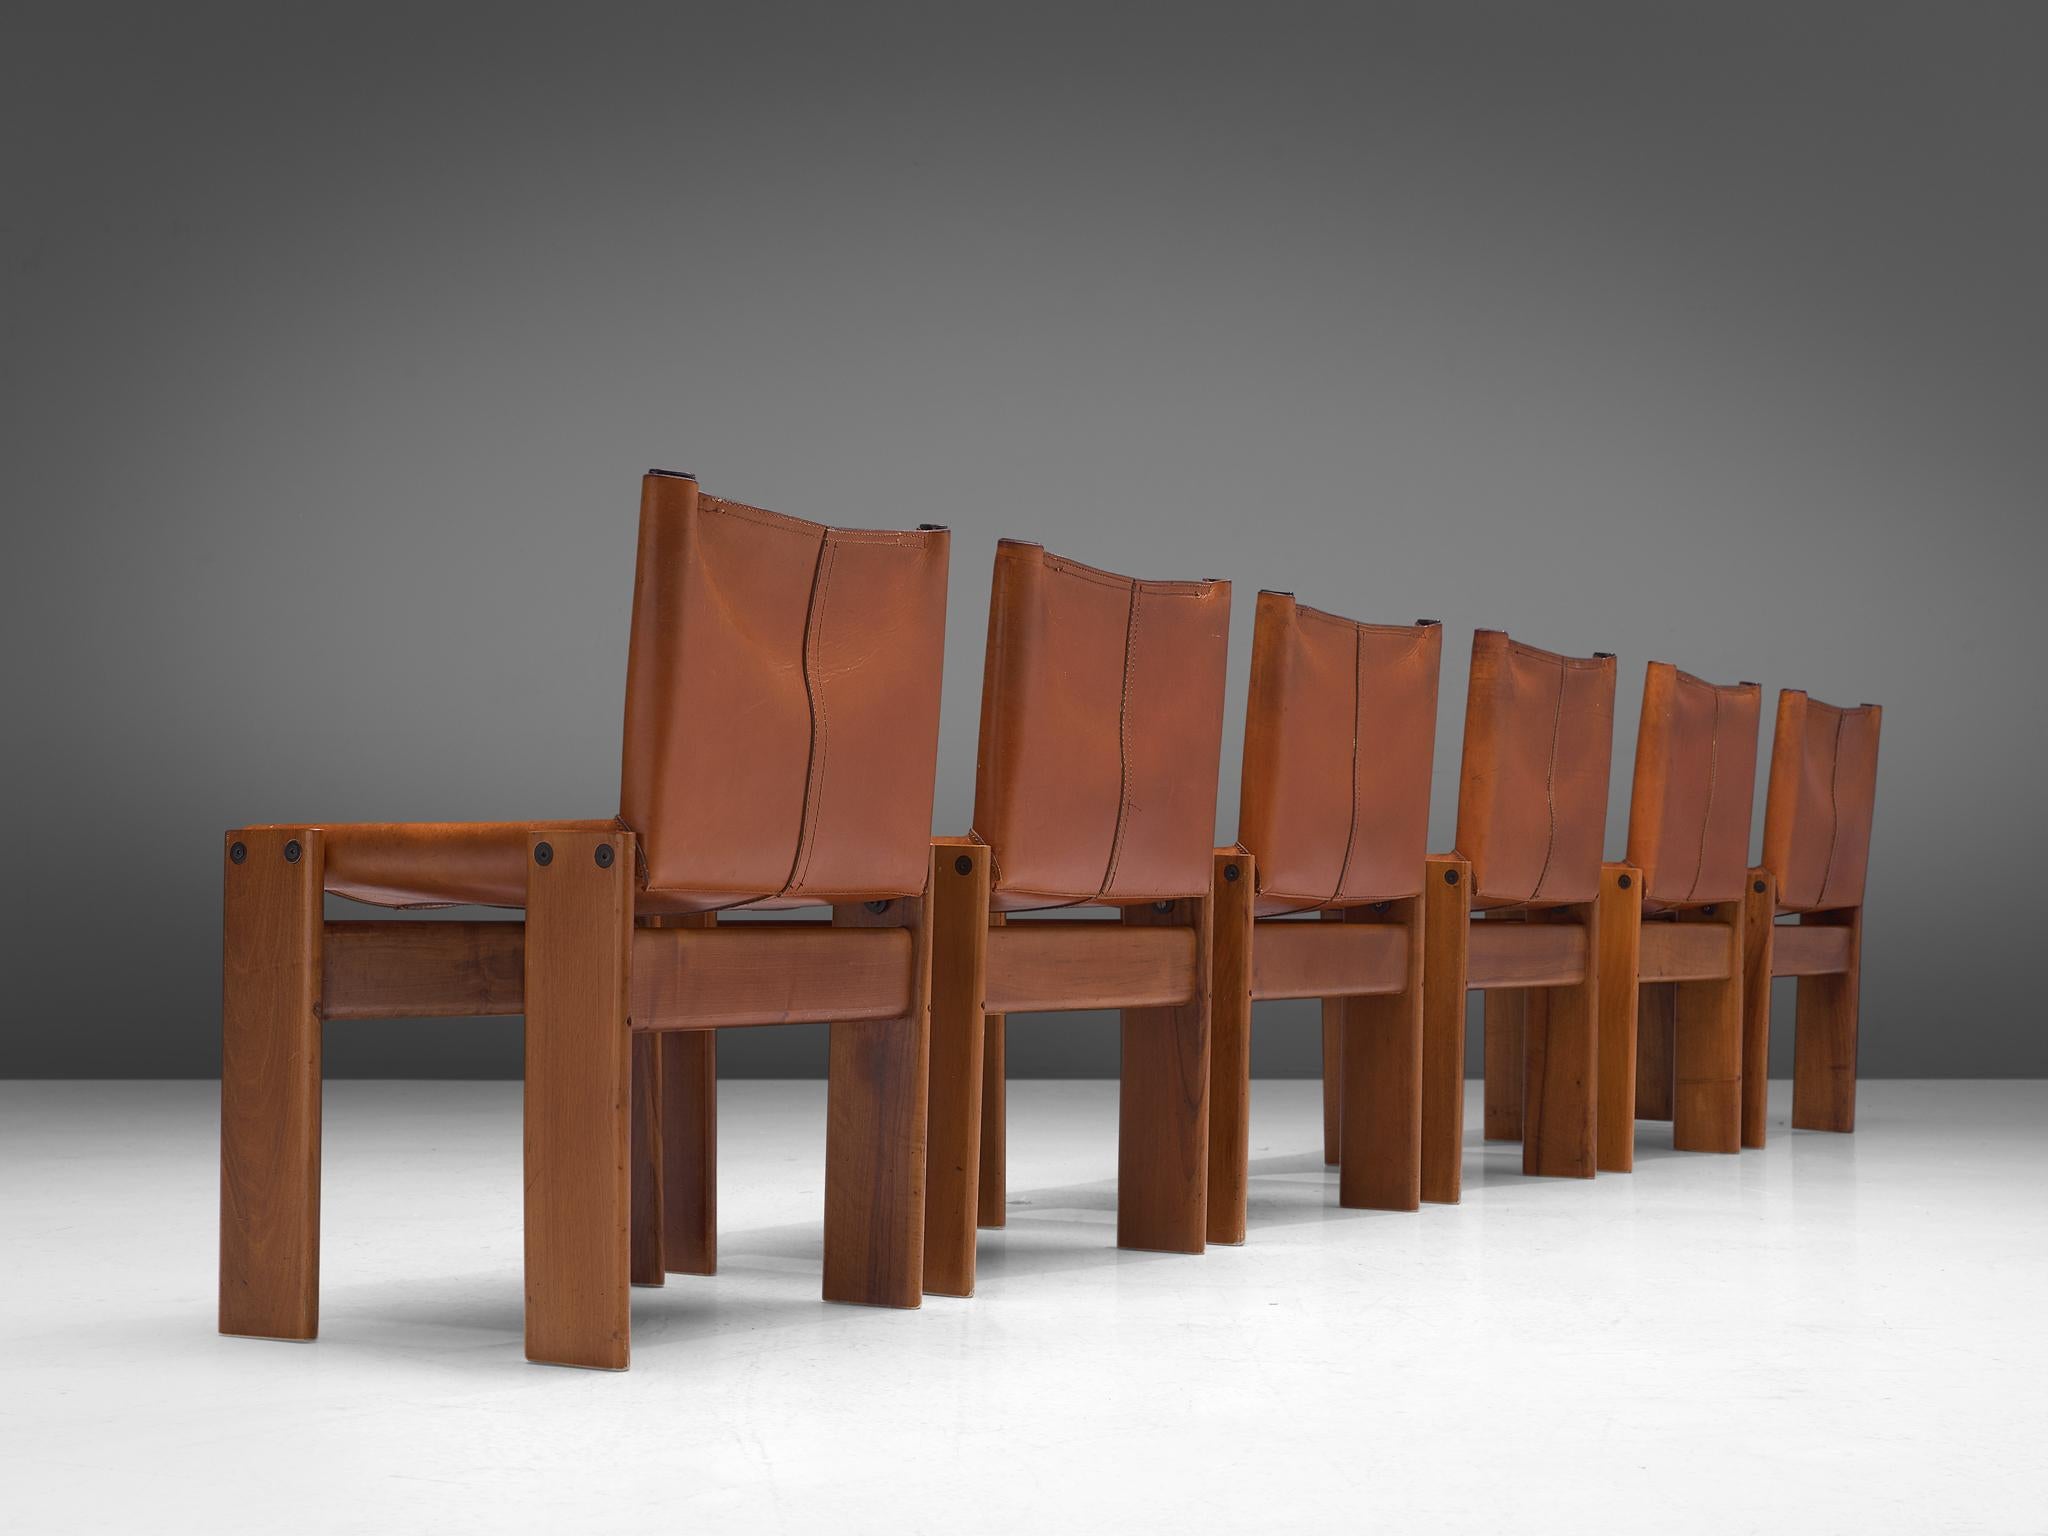 Italian Afra & Tobia Scarpa Six Monk Chairs in Cognac Leather